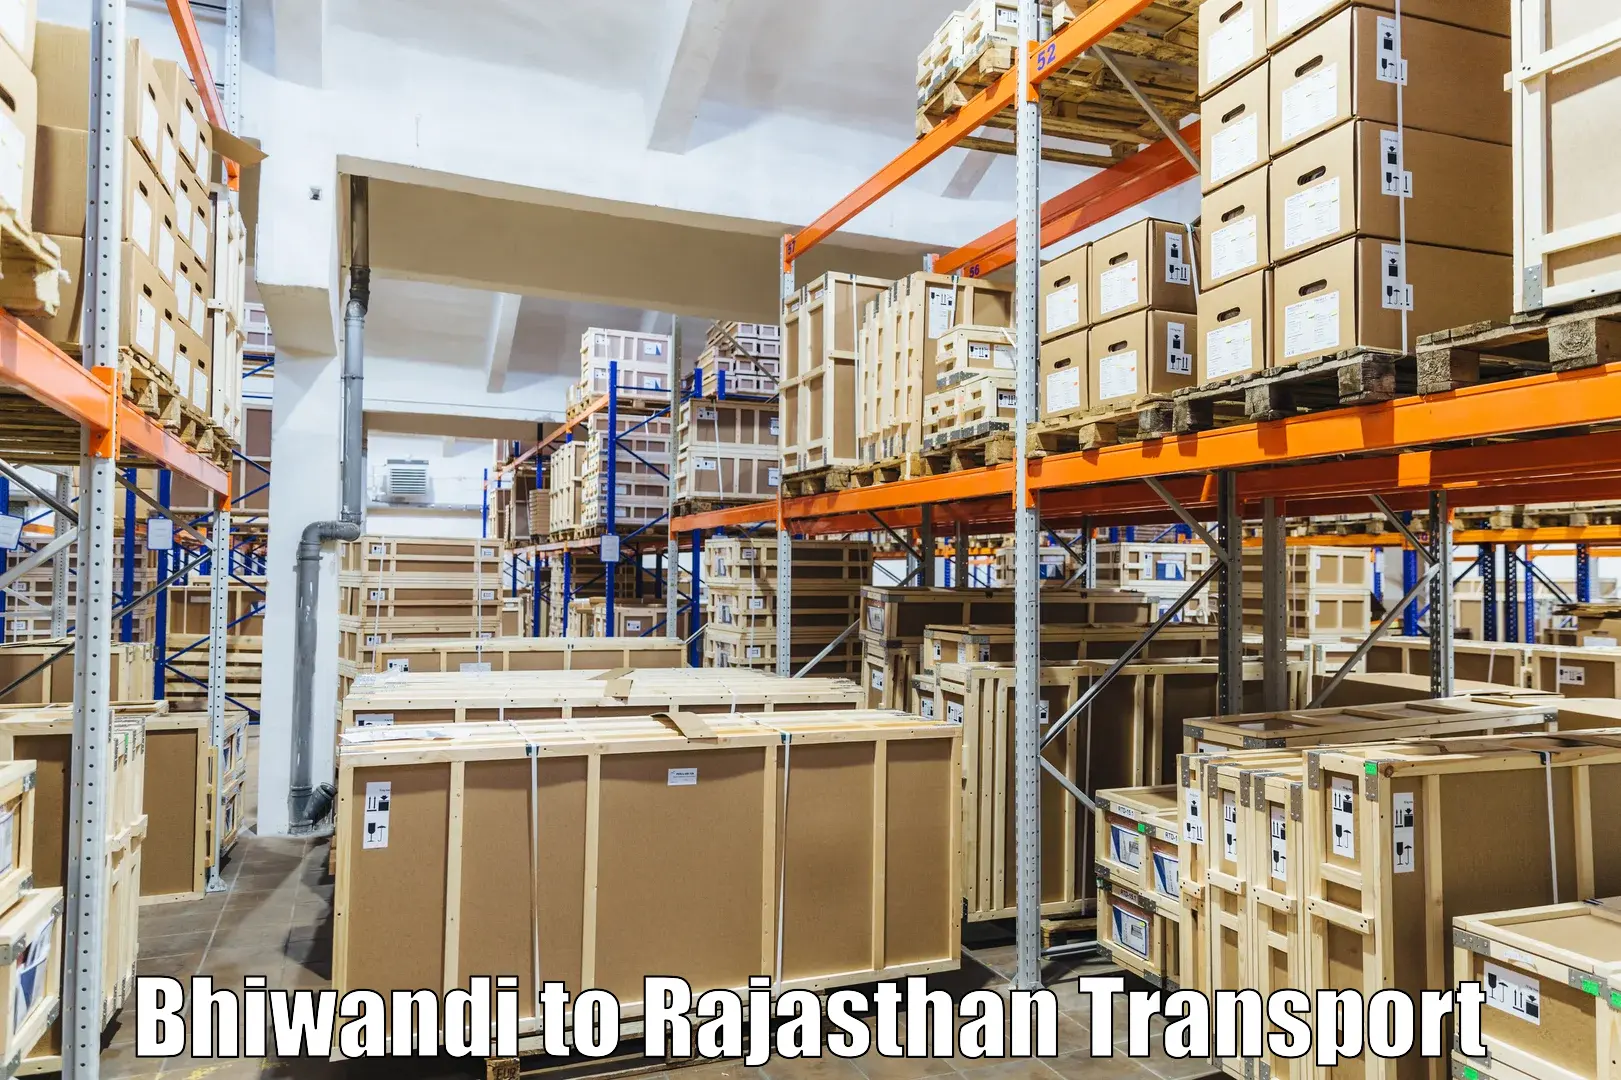 Truck transport companies in India Bhiwandi to Rajasthan